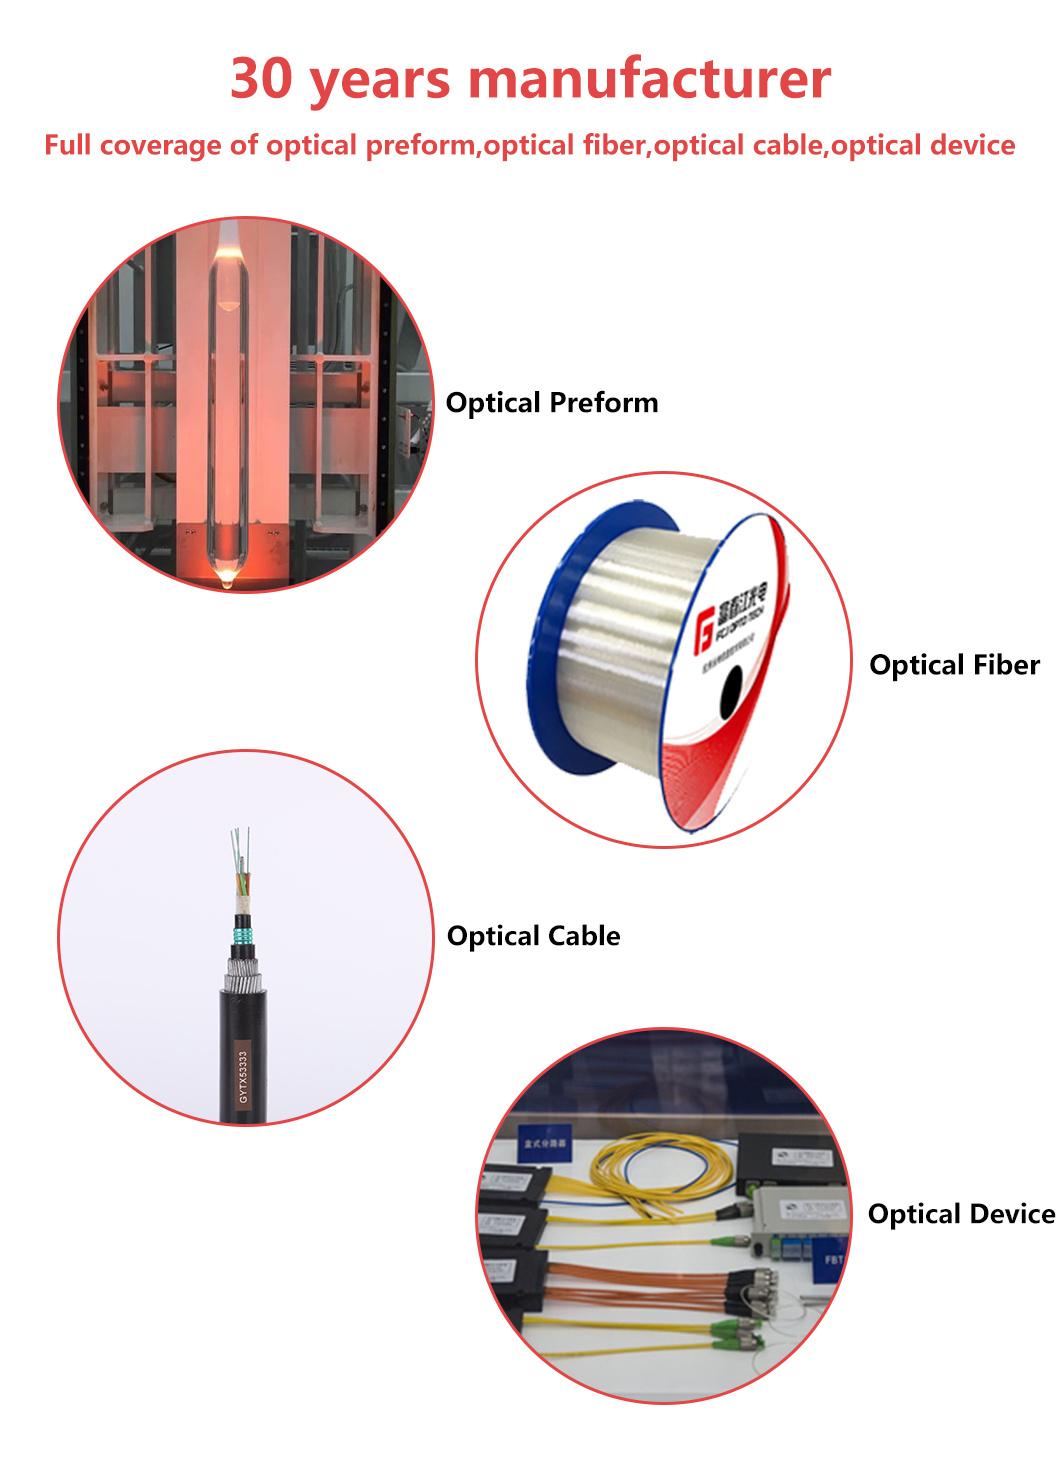 Aramid Cable Gjsfjv Backbone Using Network to The Equipment in The Building